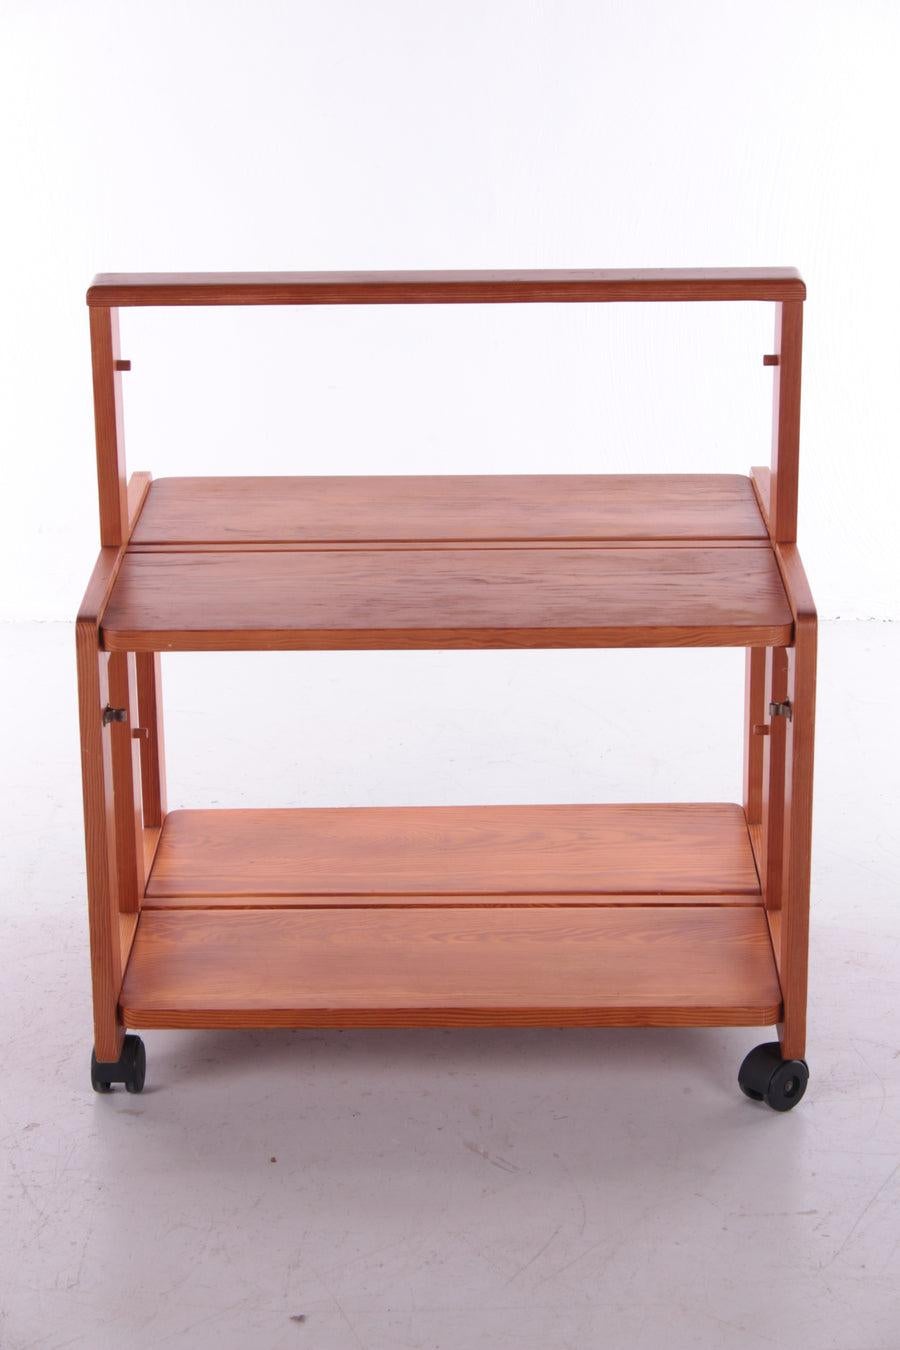 Sturdy Brutalist Trolley Made in 1960s

Tough Brutalist Trolley made in the 1960s.

Beautiful Brutalistic trolley of simplicity, this vintage serving trolley from the 1960s.

A beautiful minimalist cool design.

Entirely made of warm pine wood with